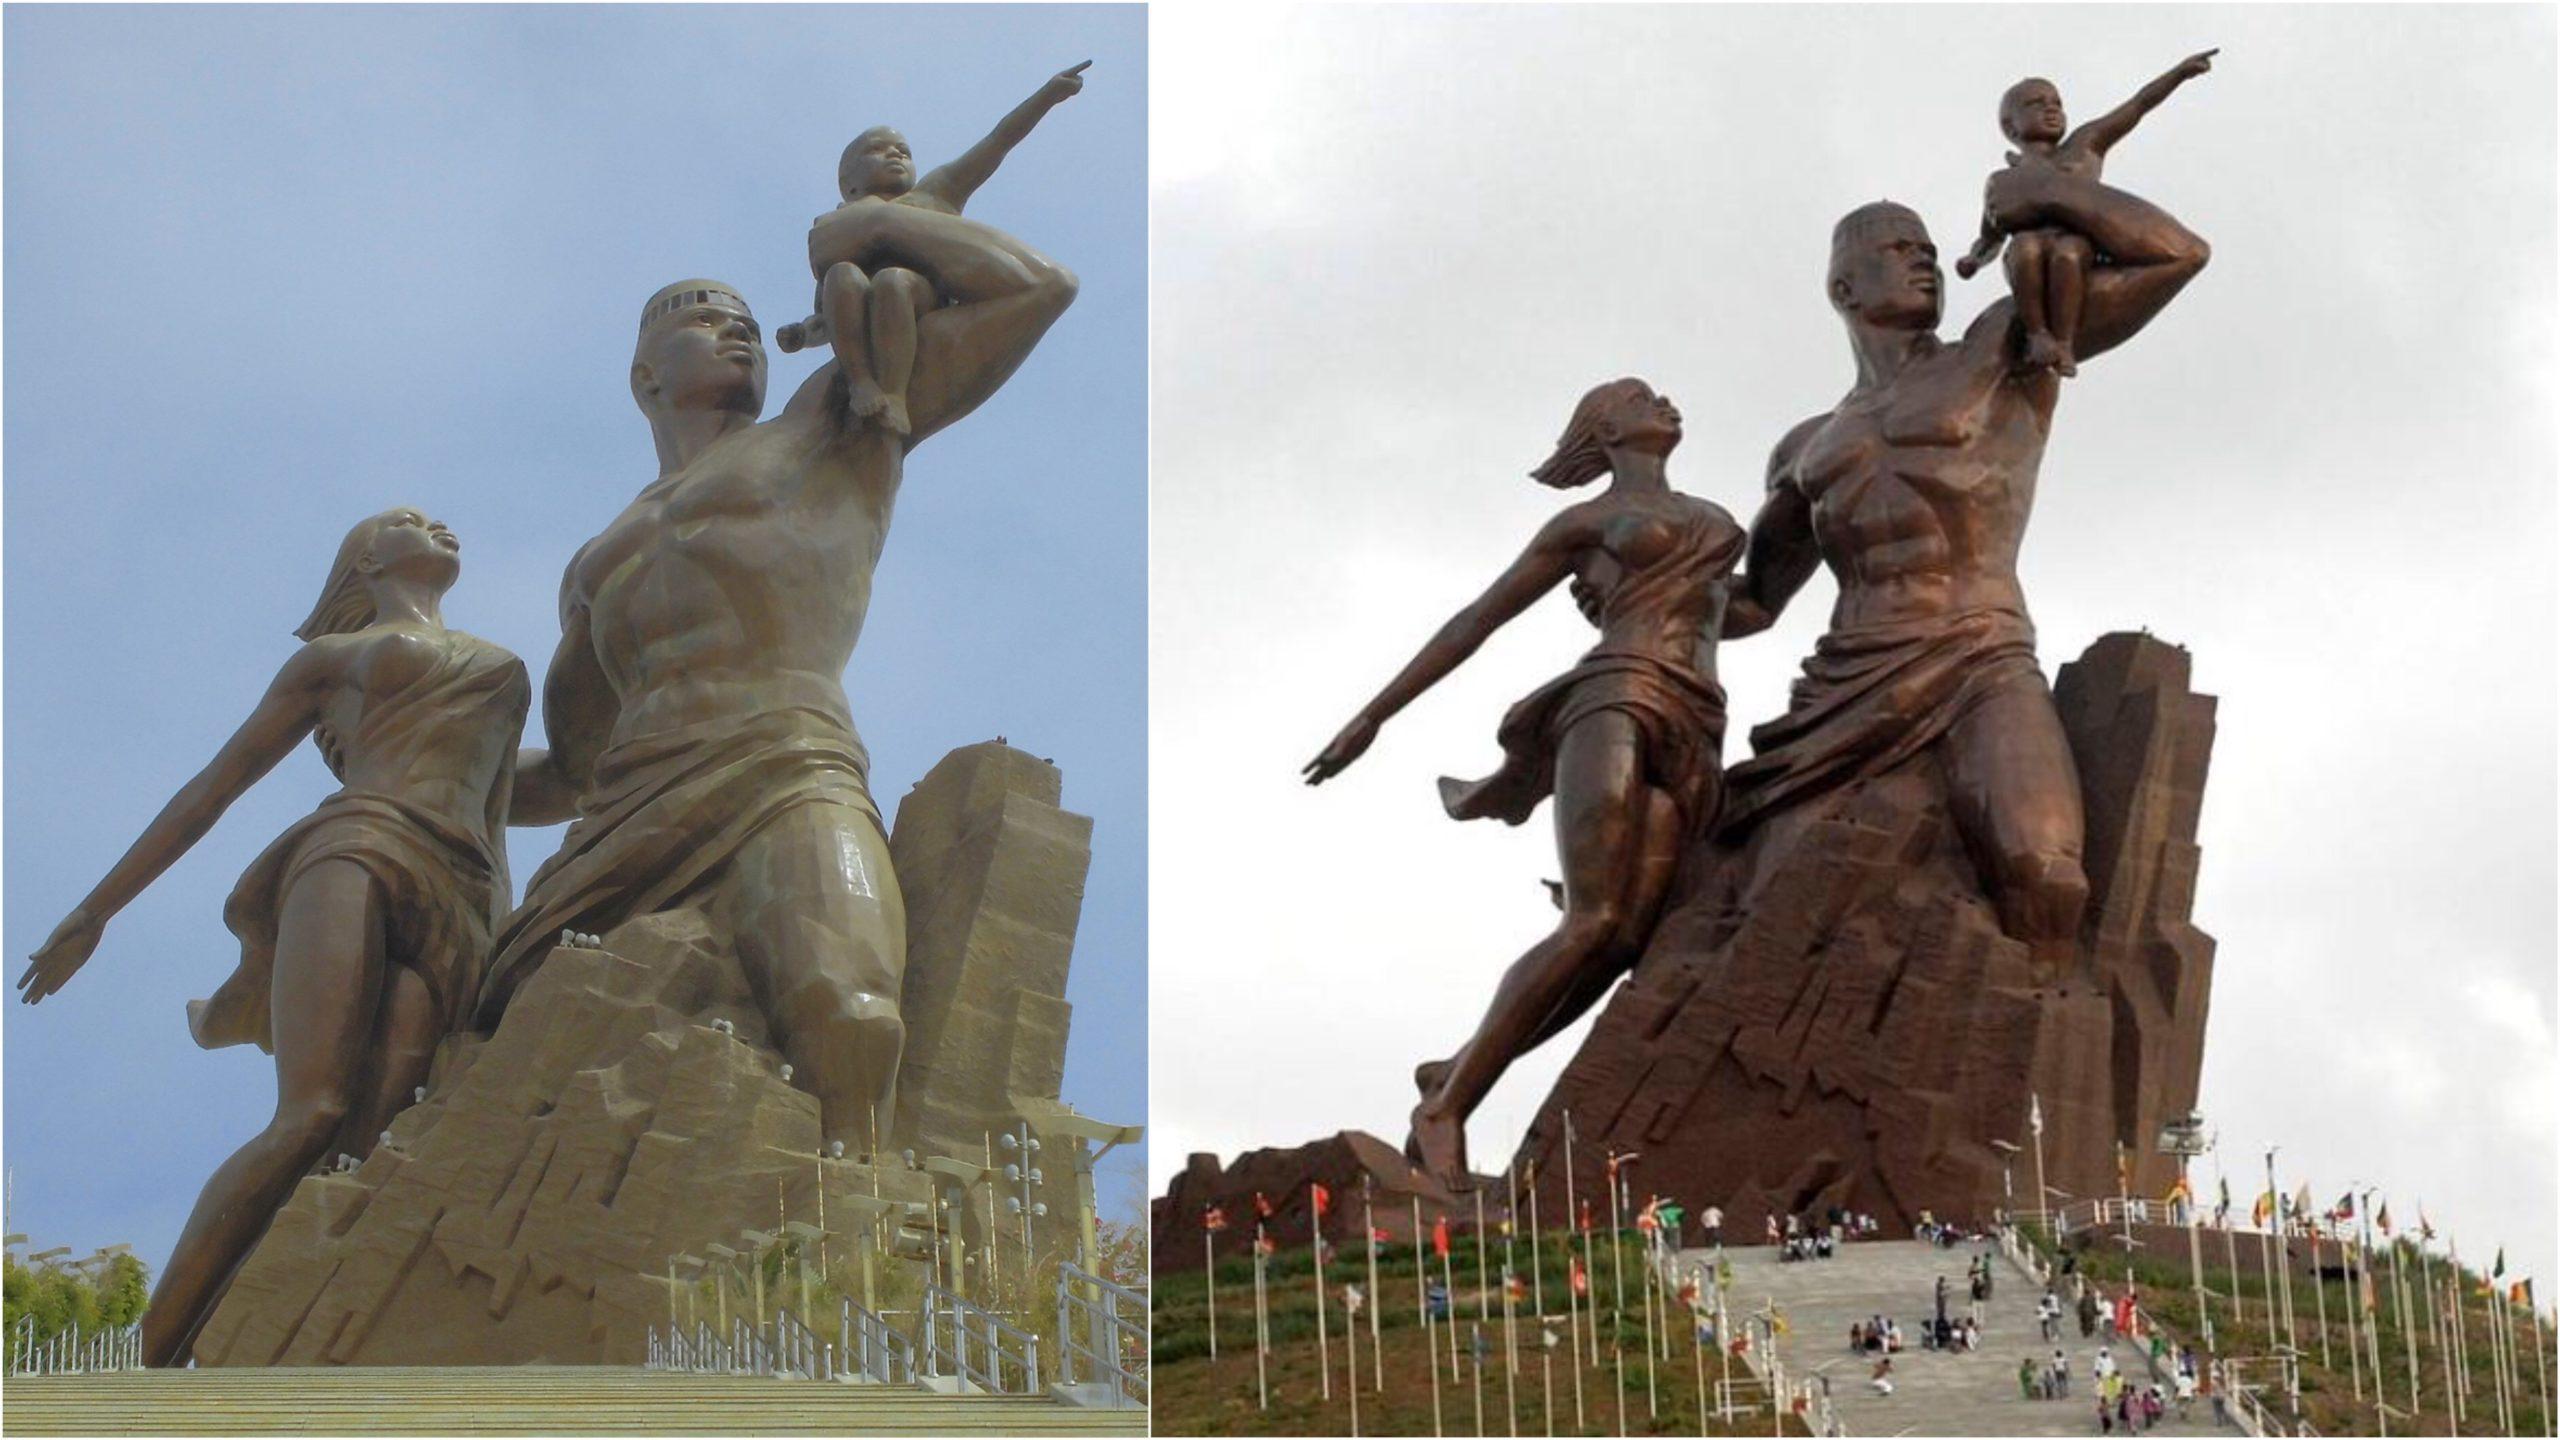 African Renaissance Monument, one of largest statues in the world